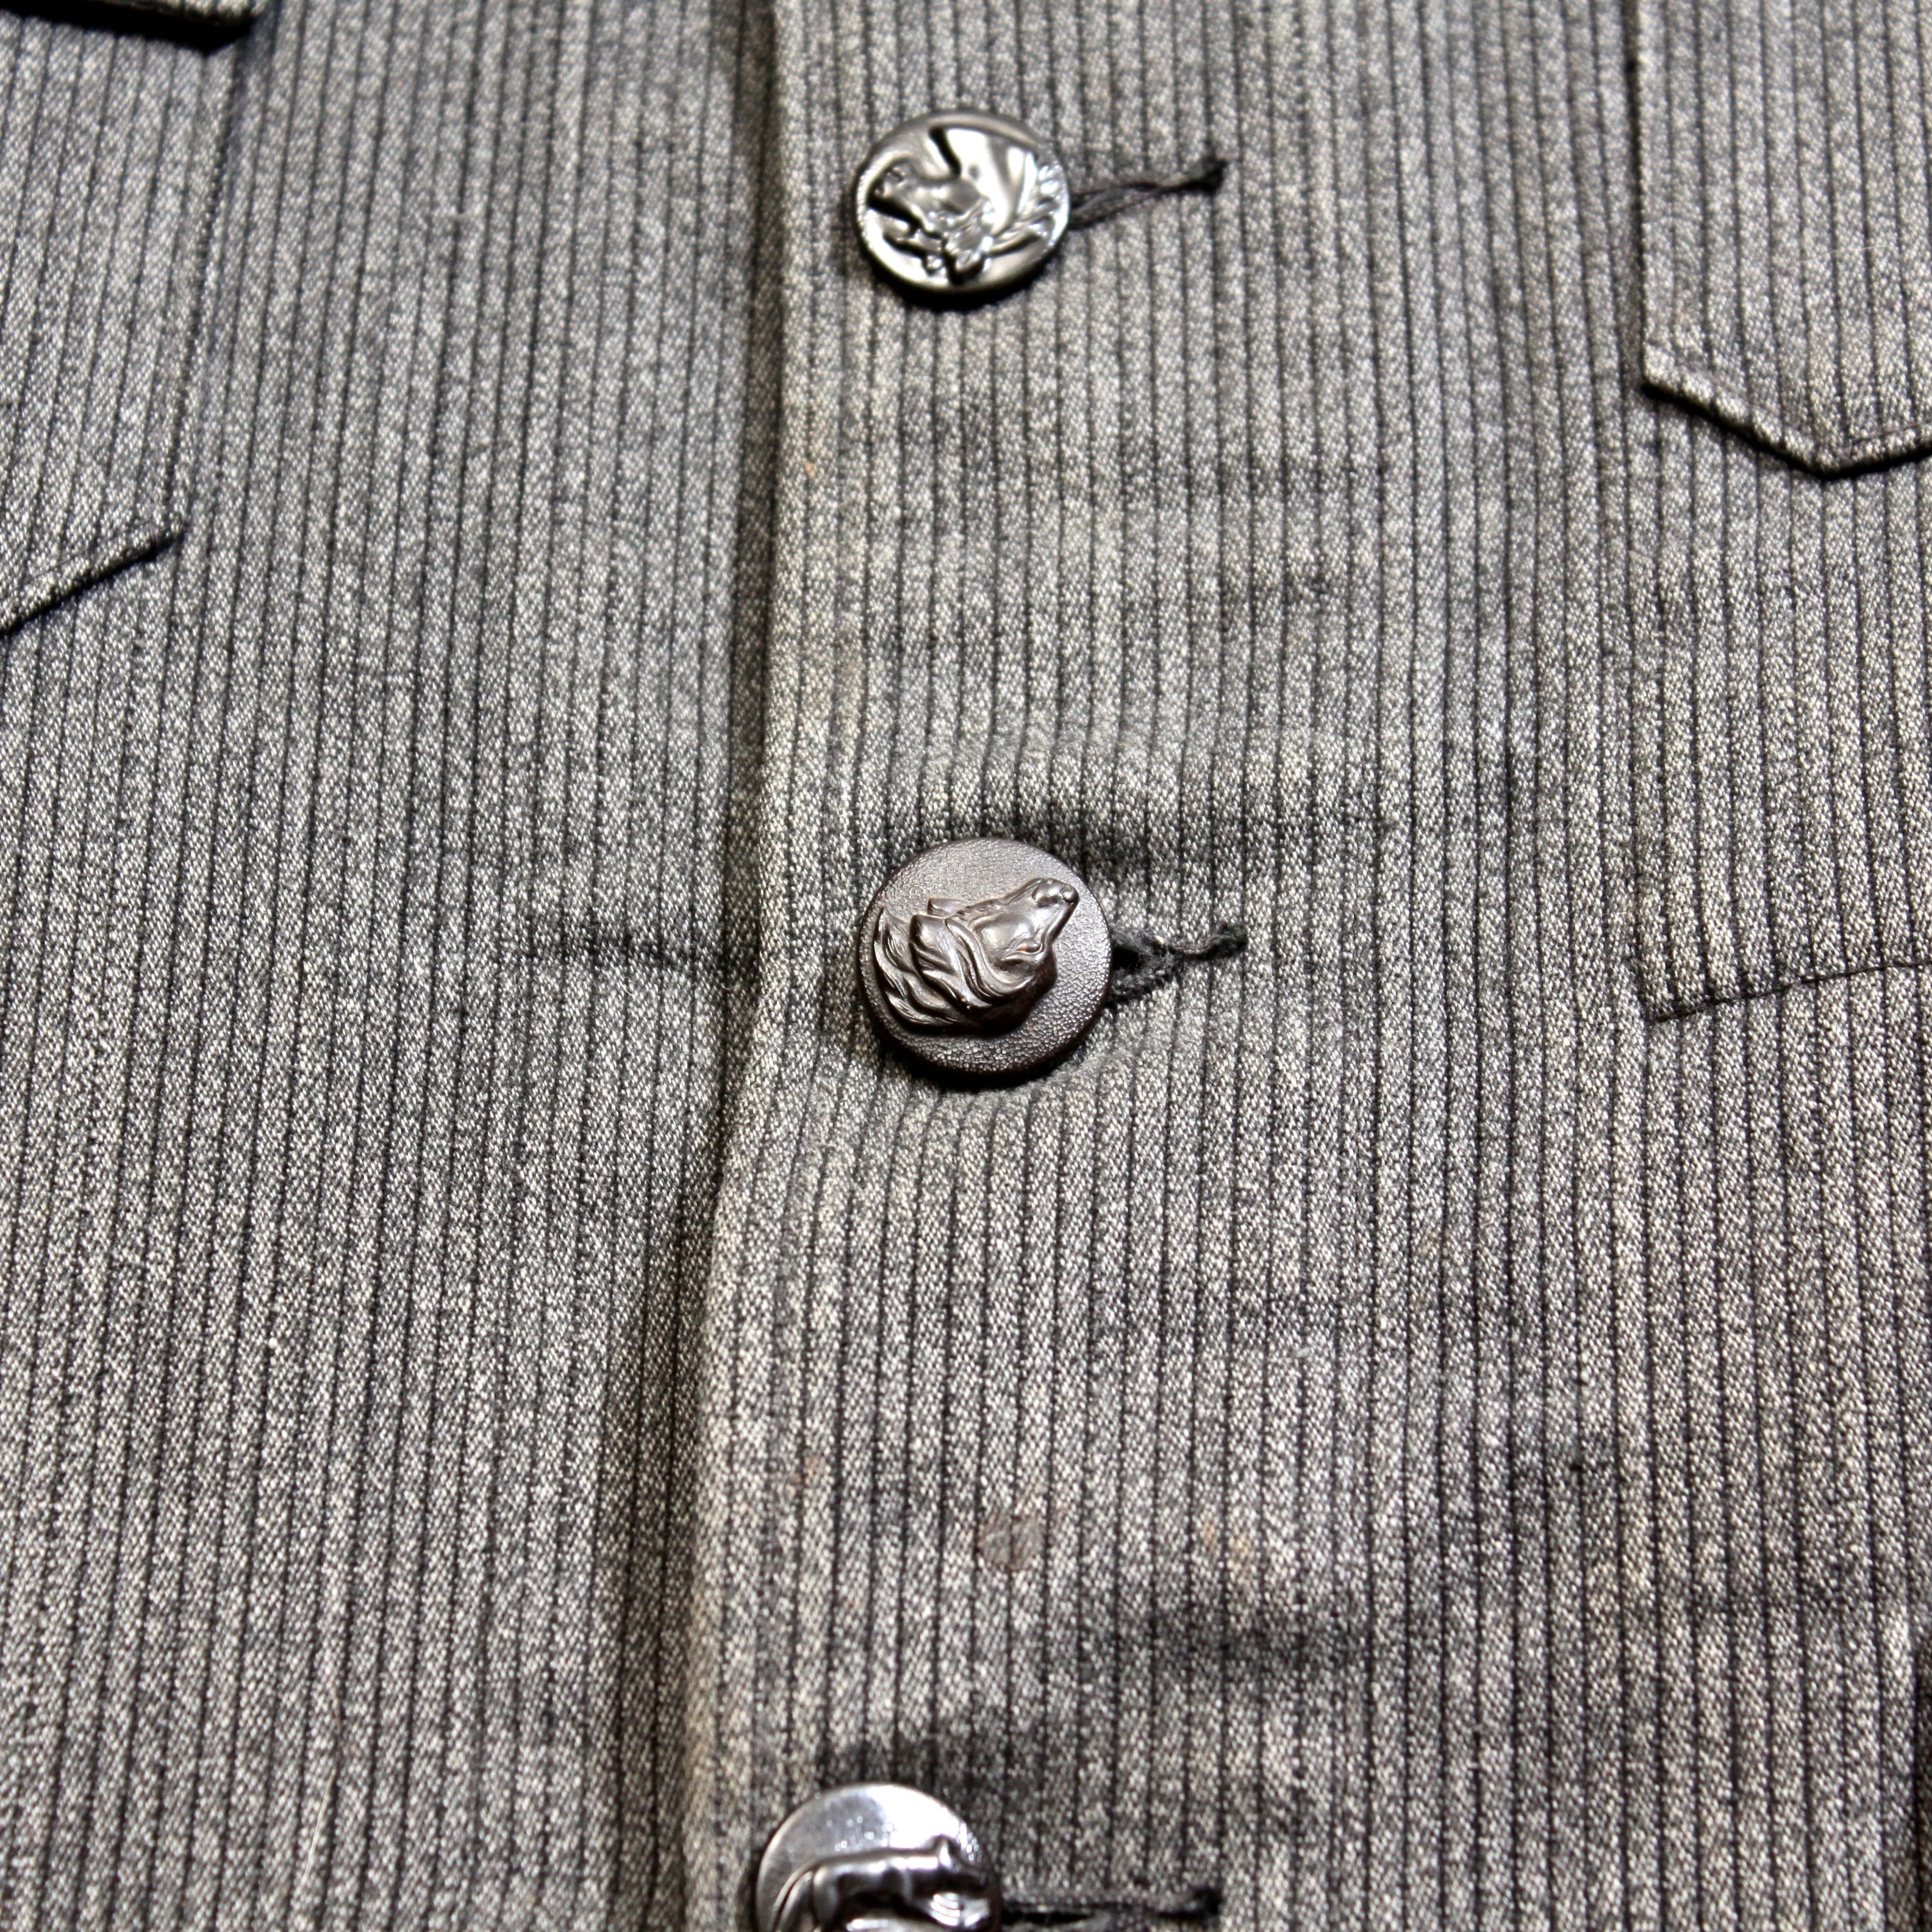 0685. 1940's French cotton pique hunting jacket animal button 40s